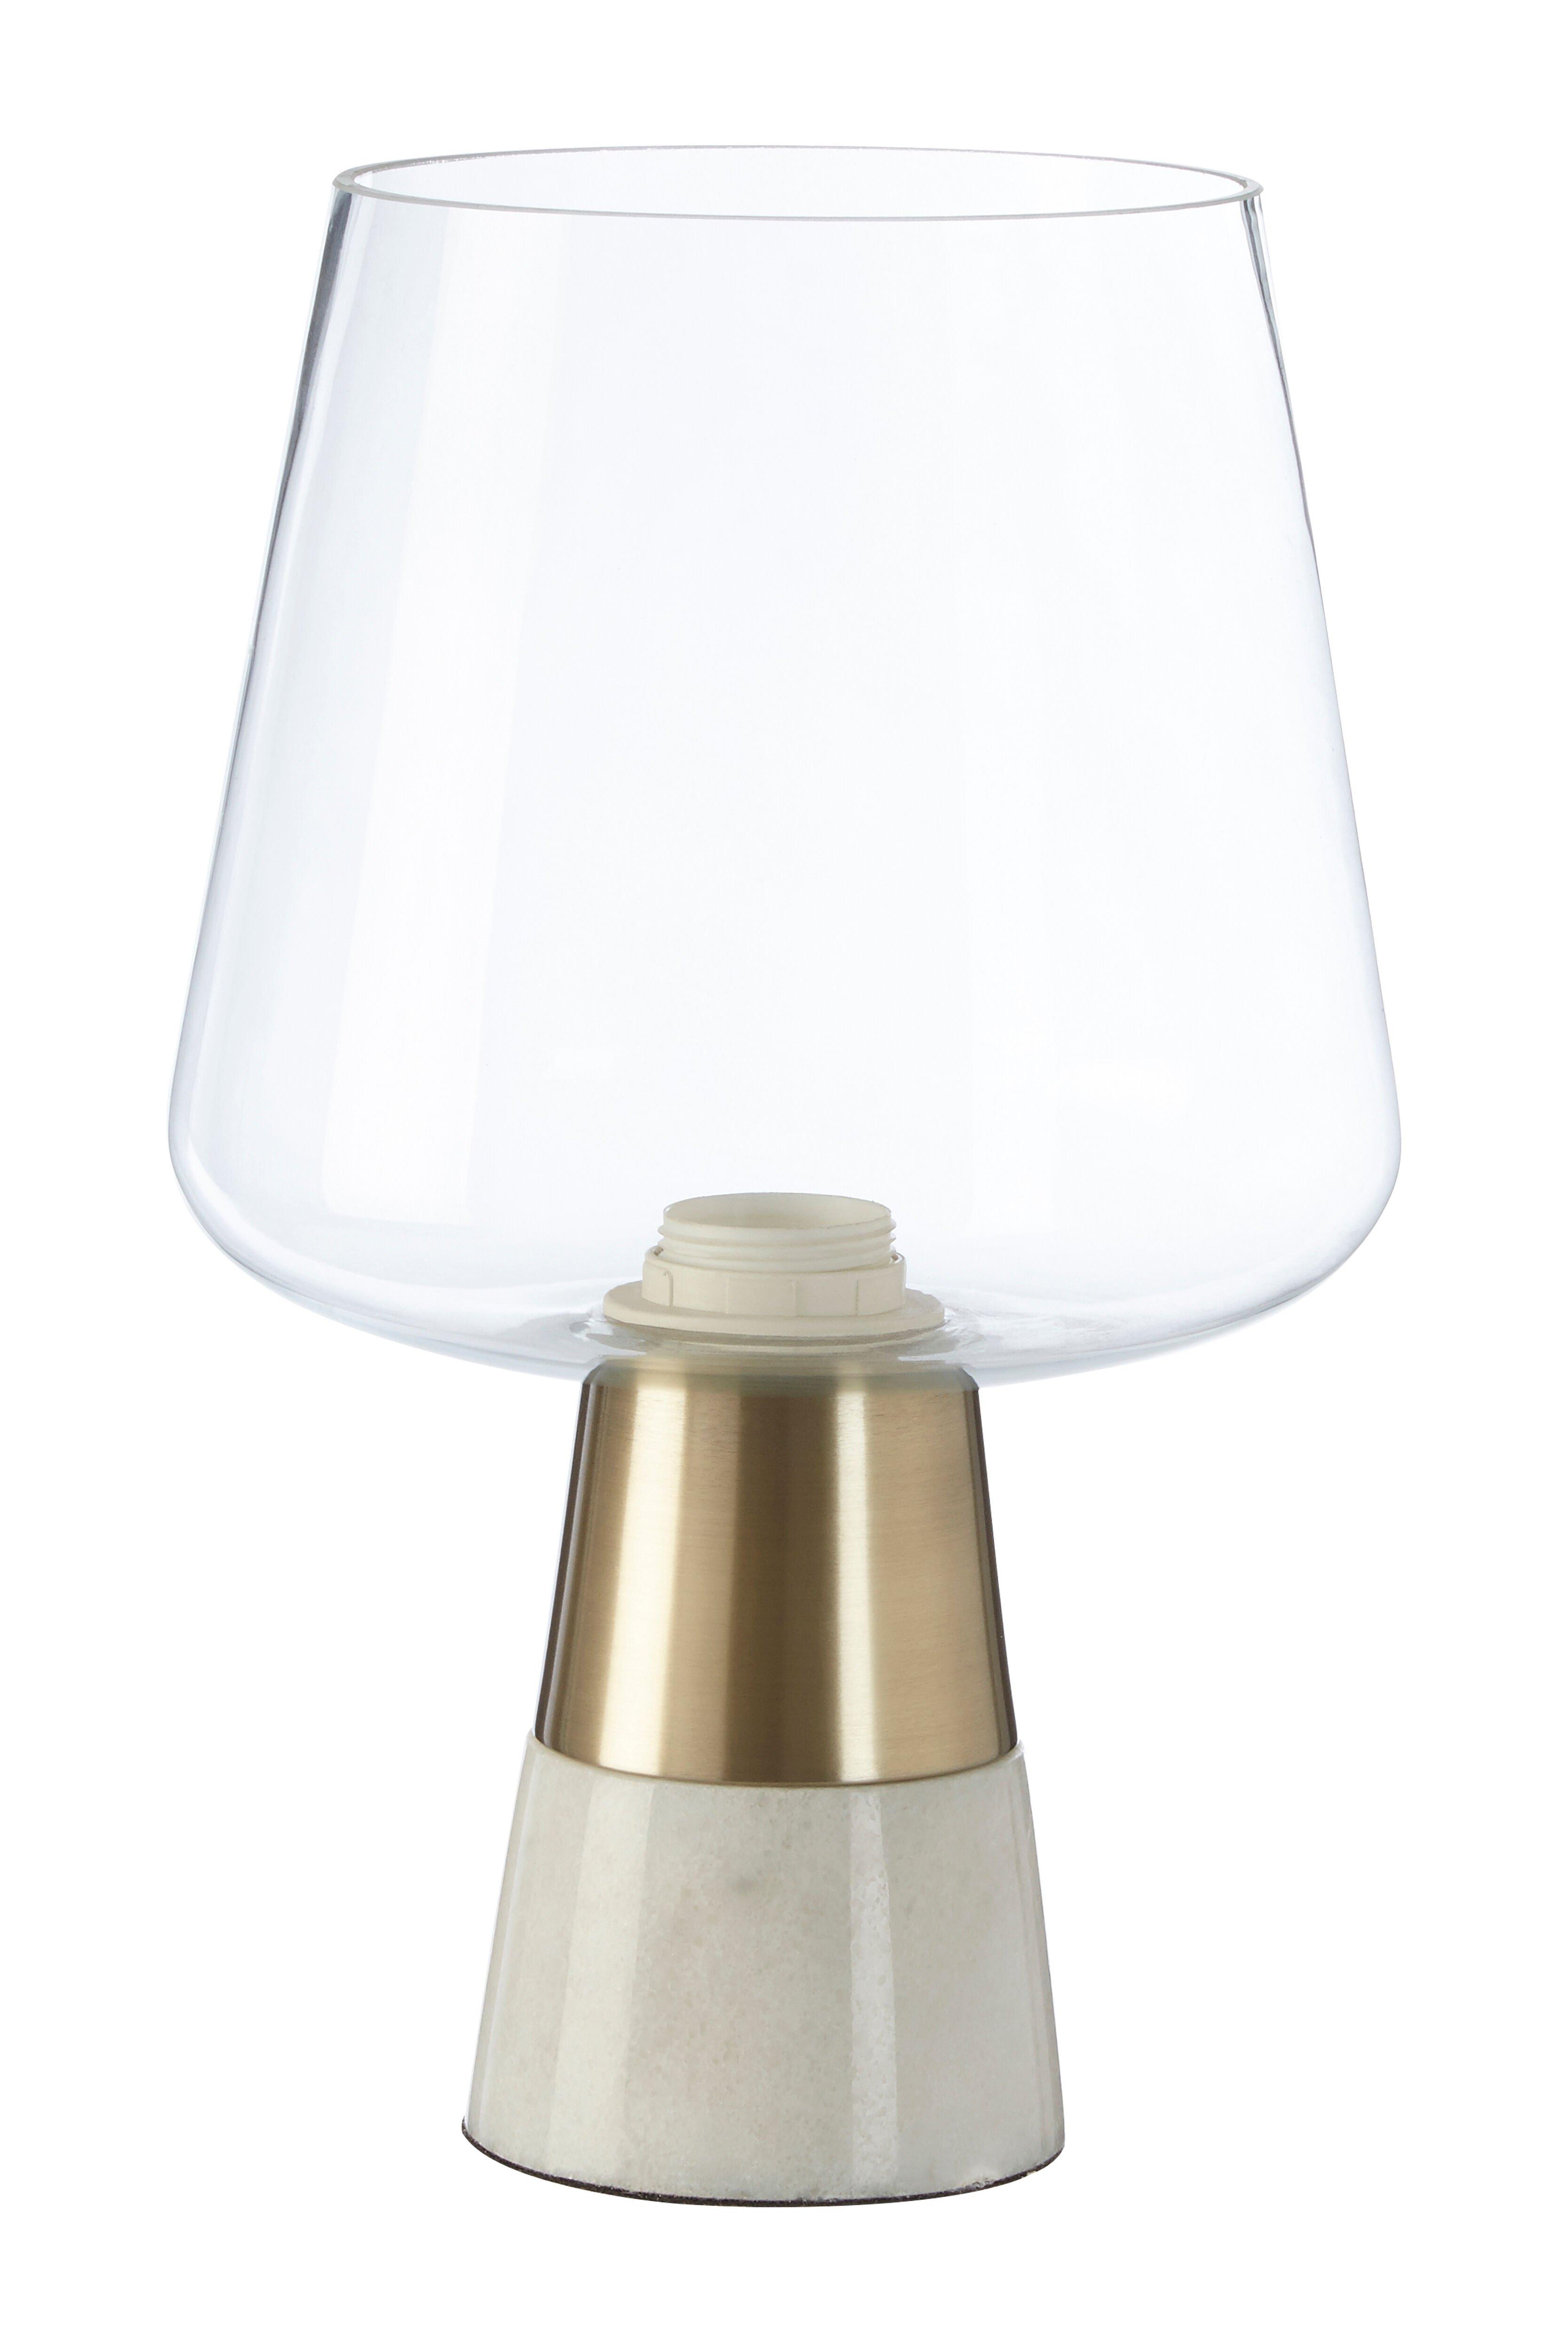 Interiors by Premier Glass Shade Edison Lamp